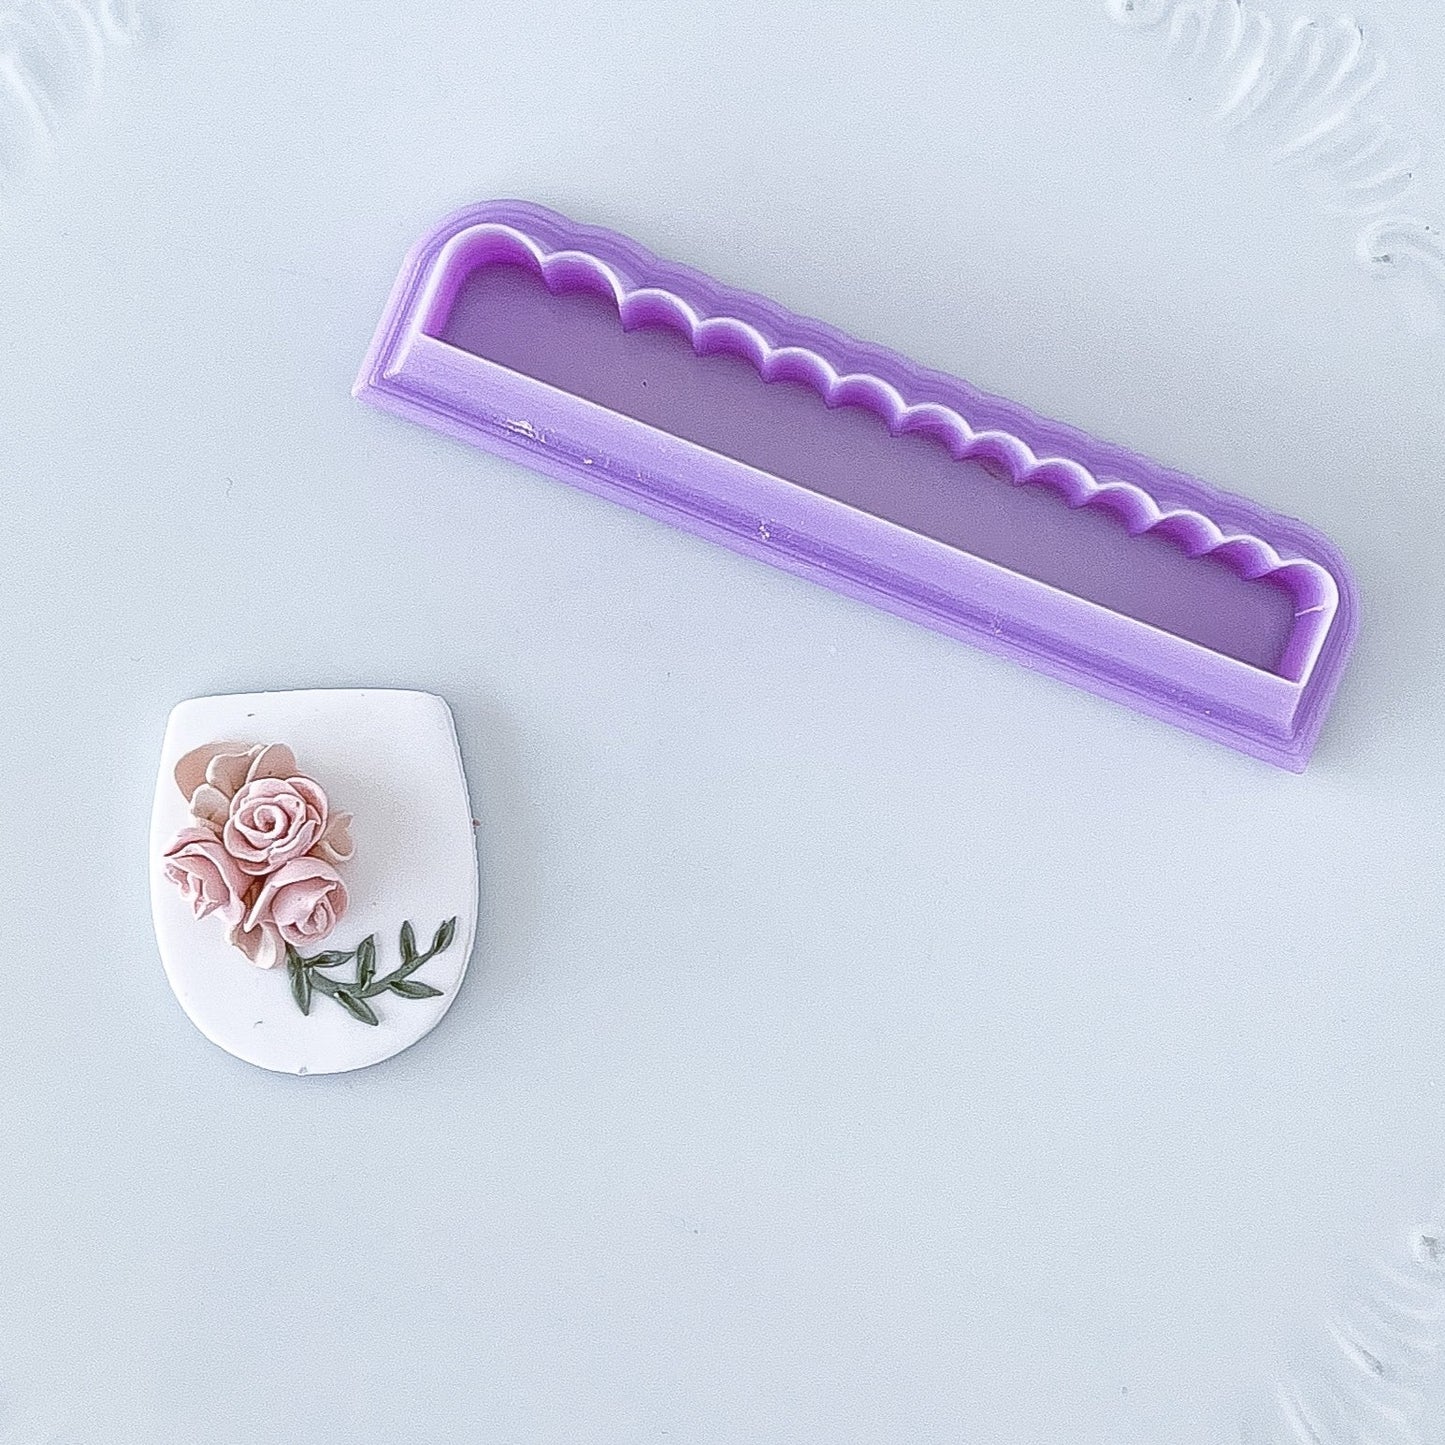 Rounded Flower Roller - March Launch